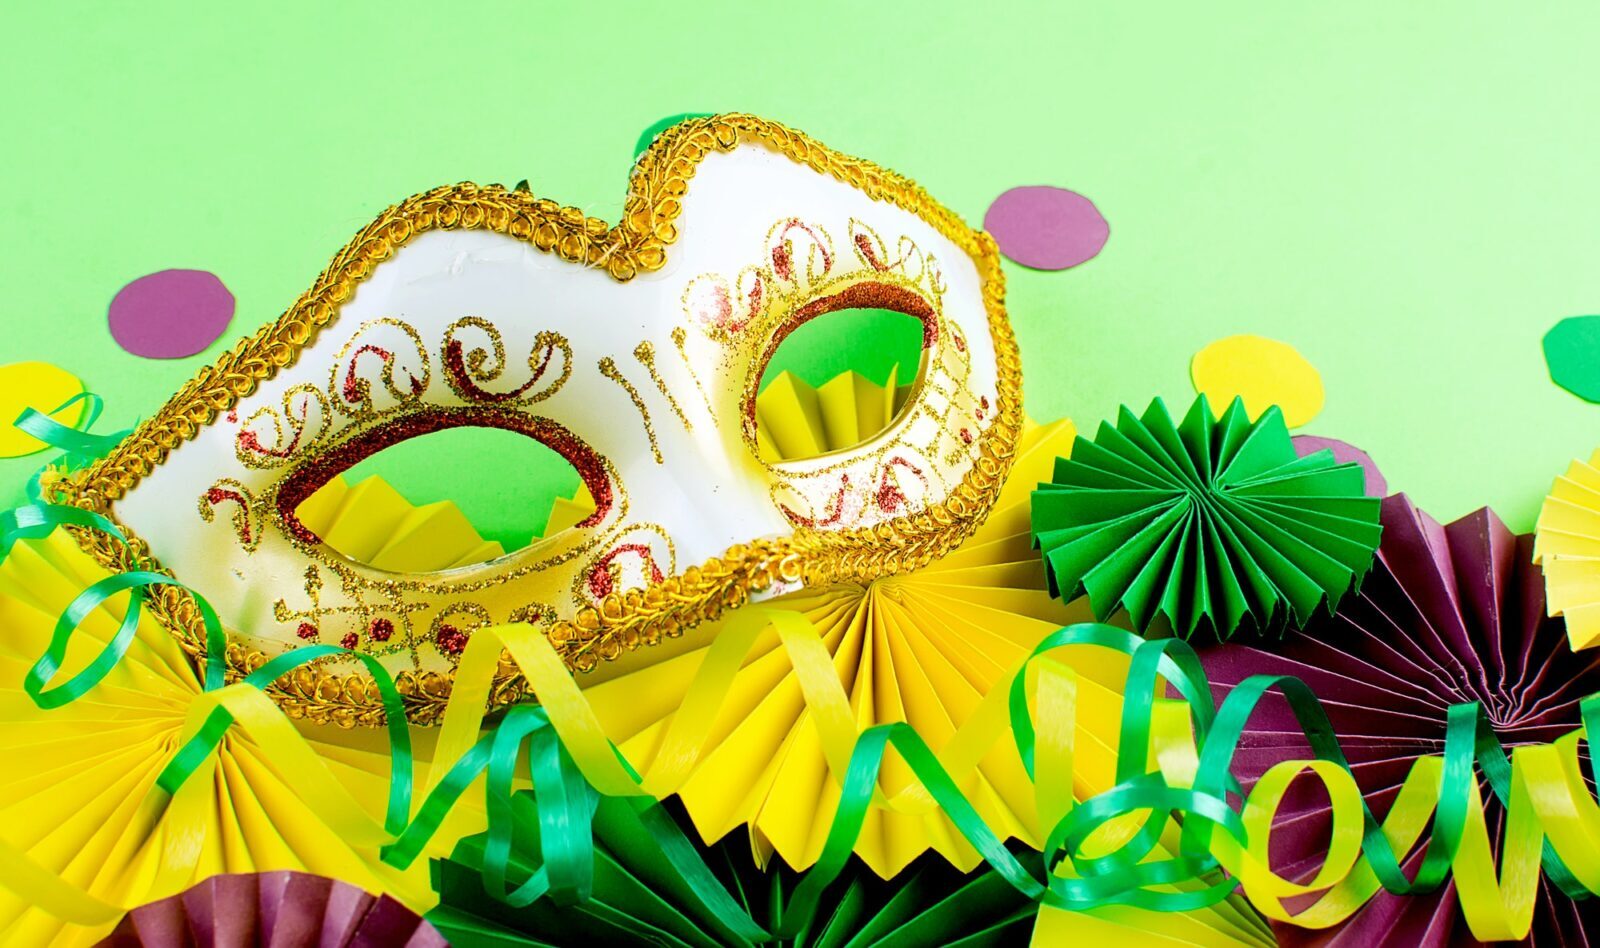 colorful background of mardi gras or carnival